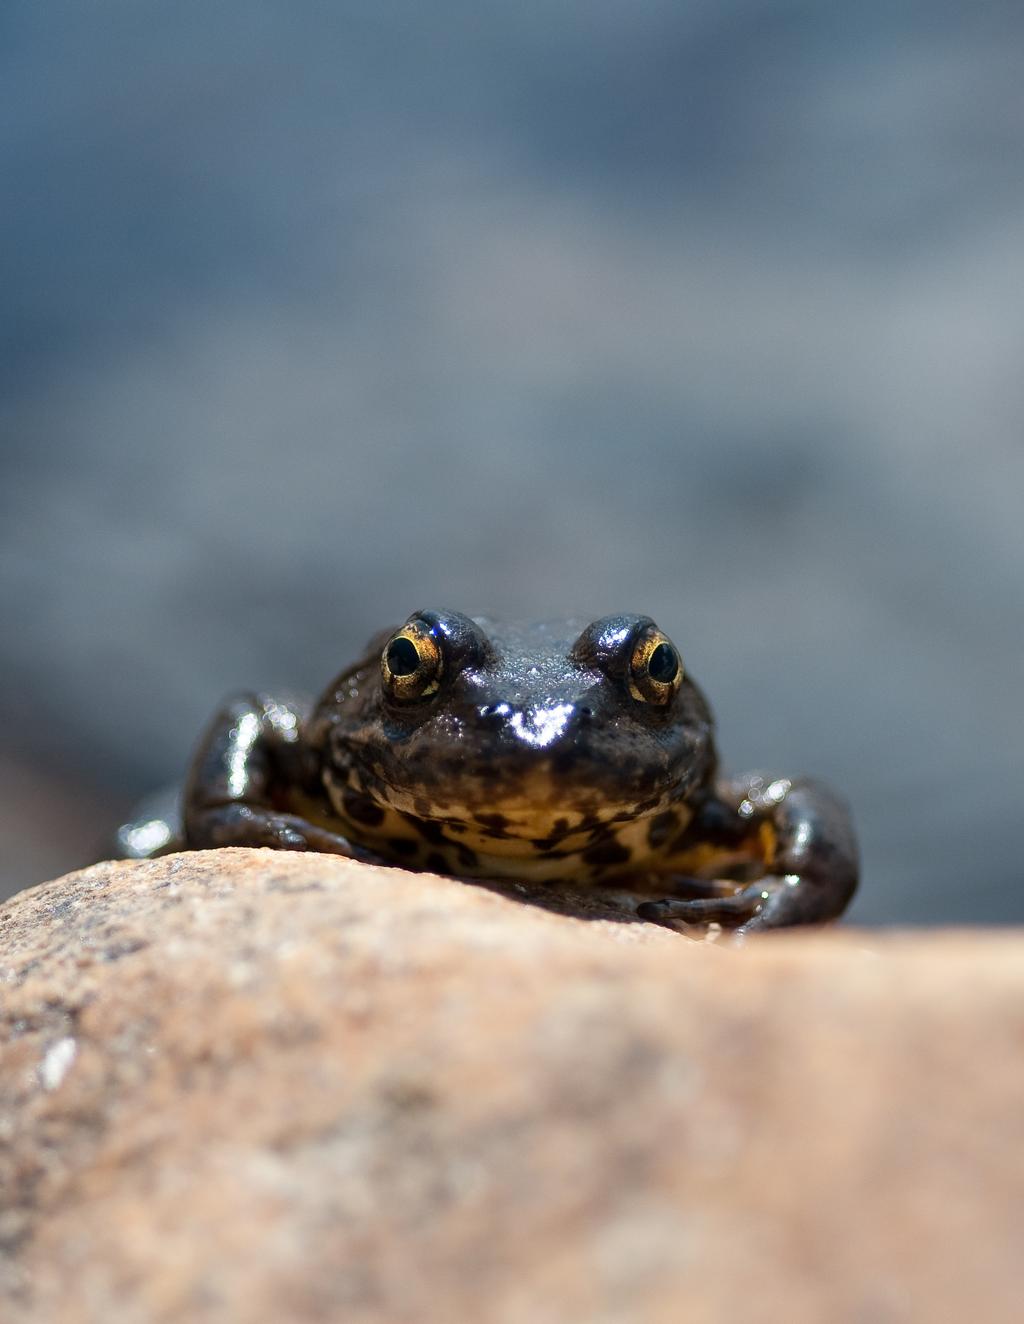 Dying for Protection: The 10 Most Vulnerable, Least Protected Amphibians and Reptiles in